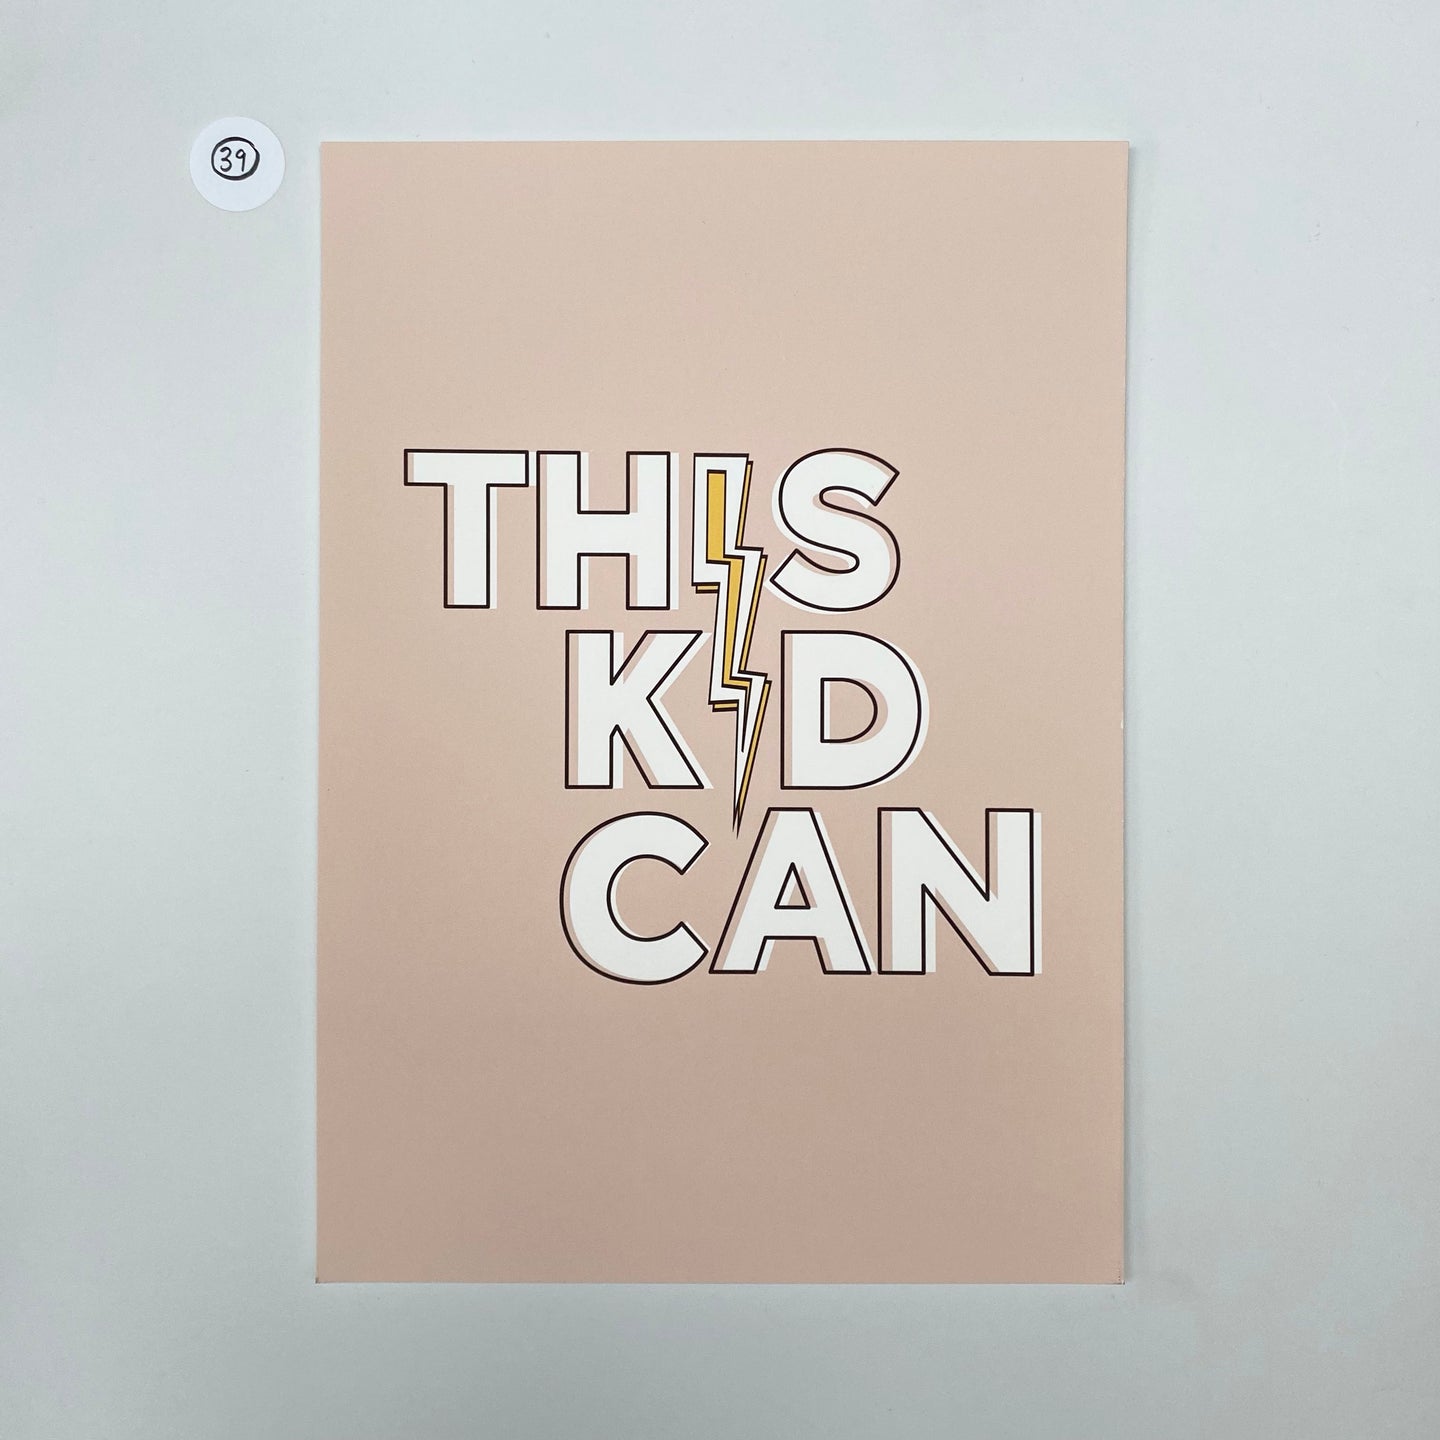 Outlet 39: This Kid Can - A4